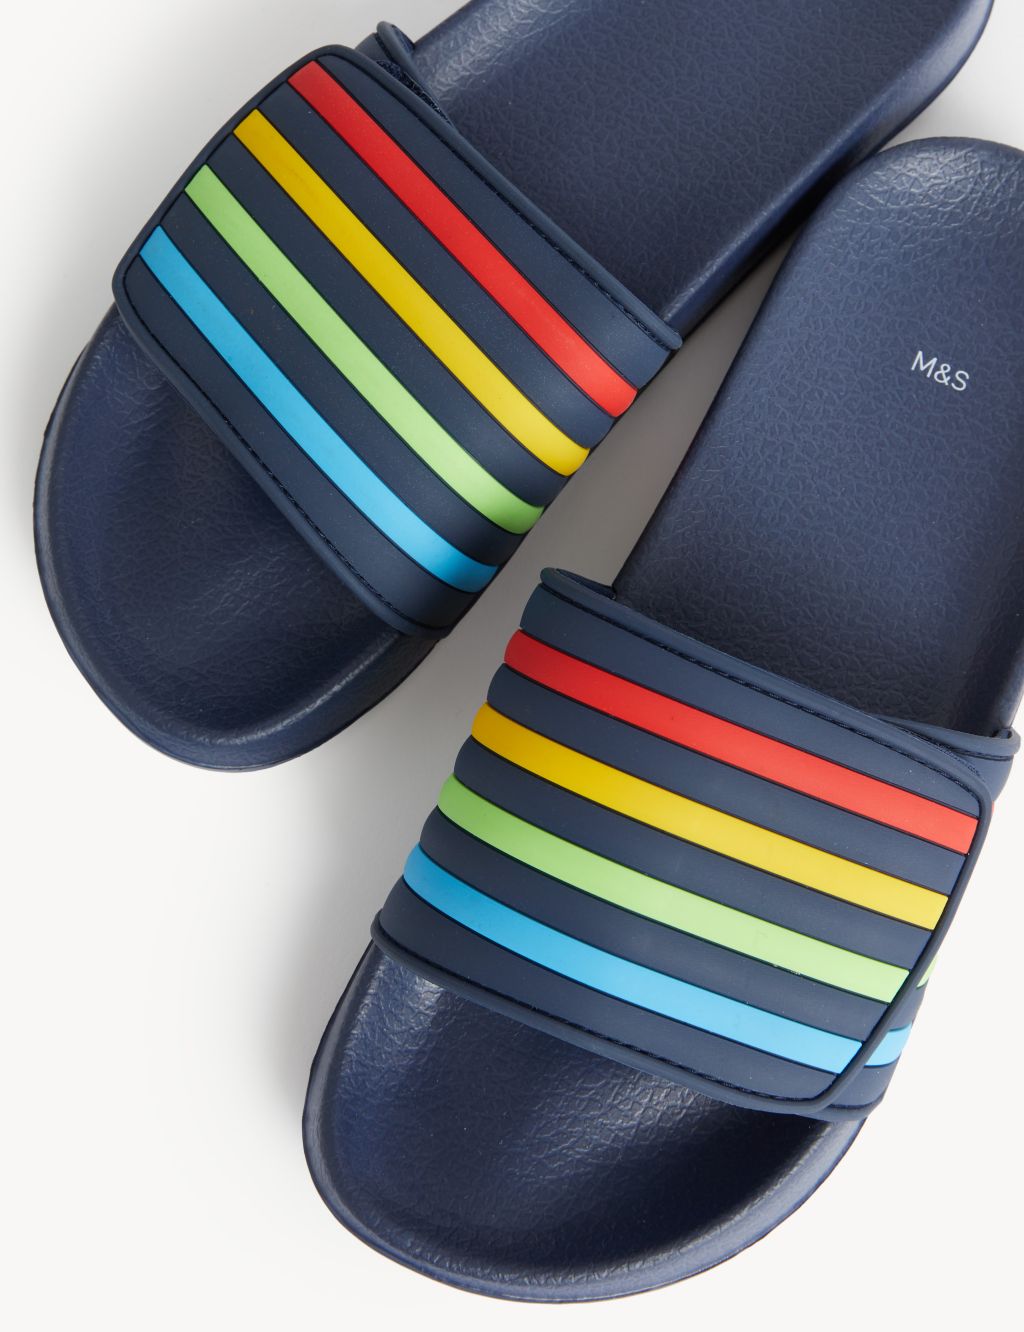 Kids' Striped Sliders (13 Small - 7 Large) image 2